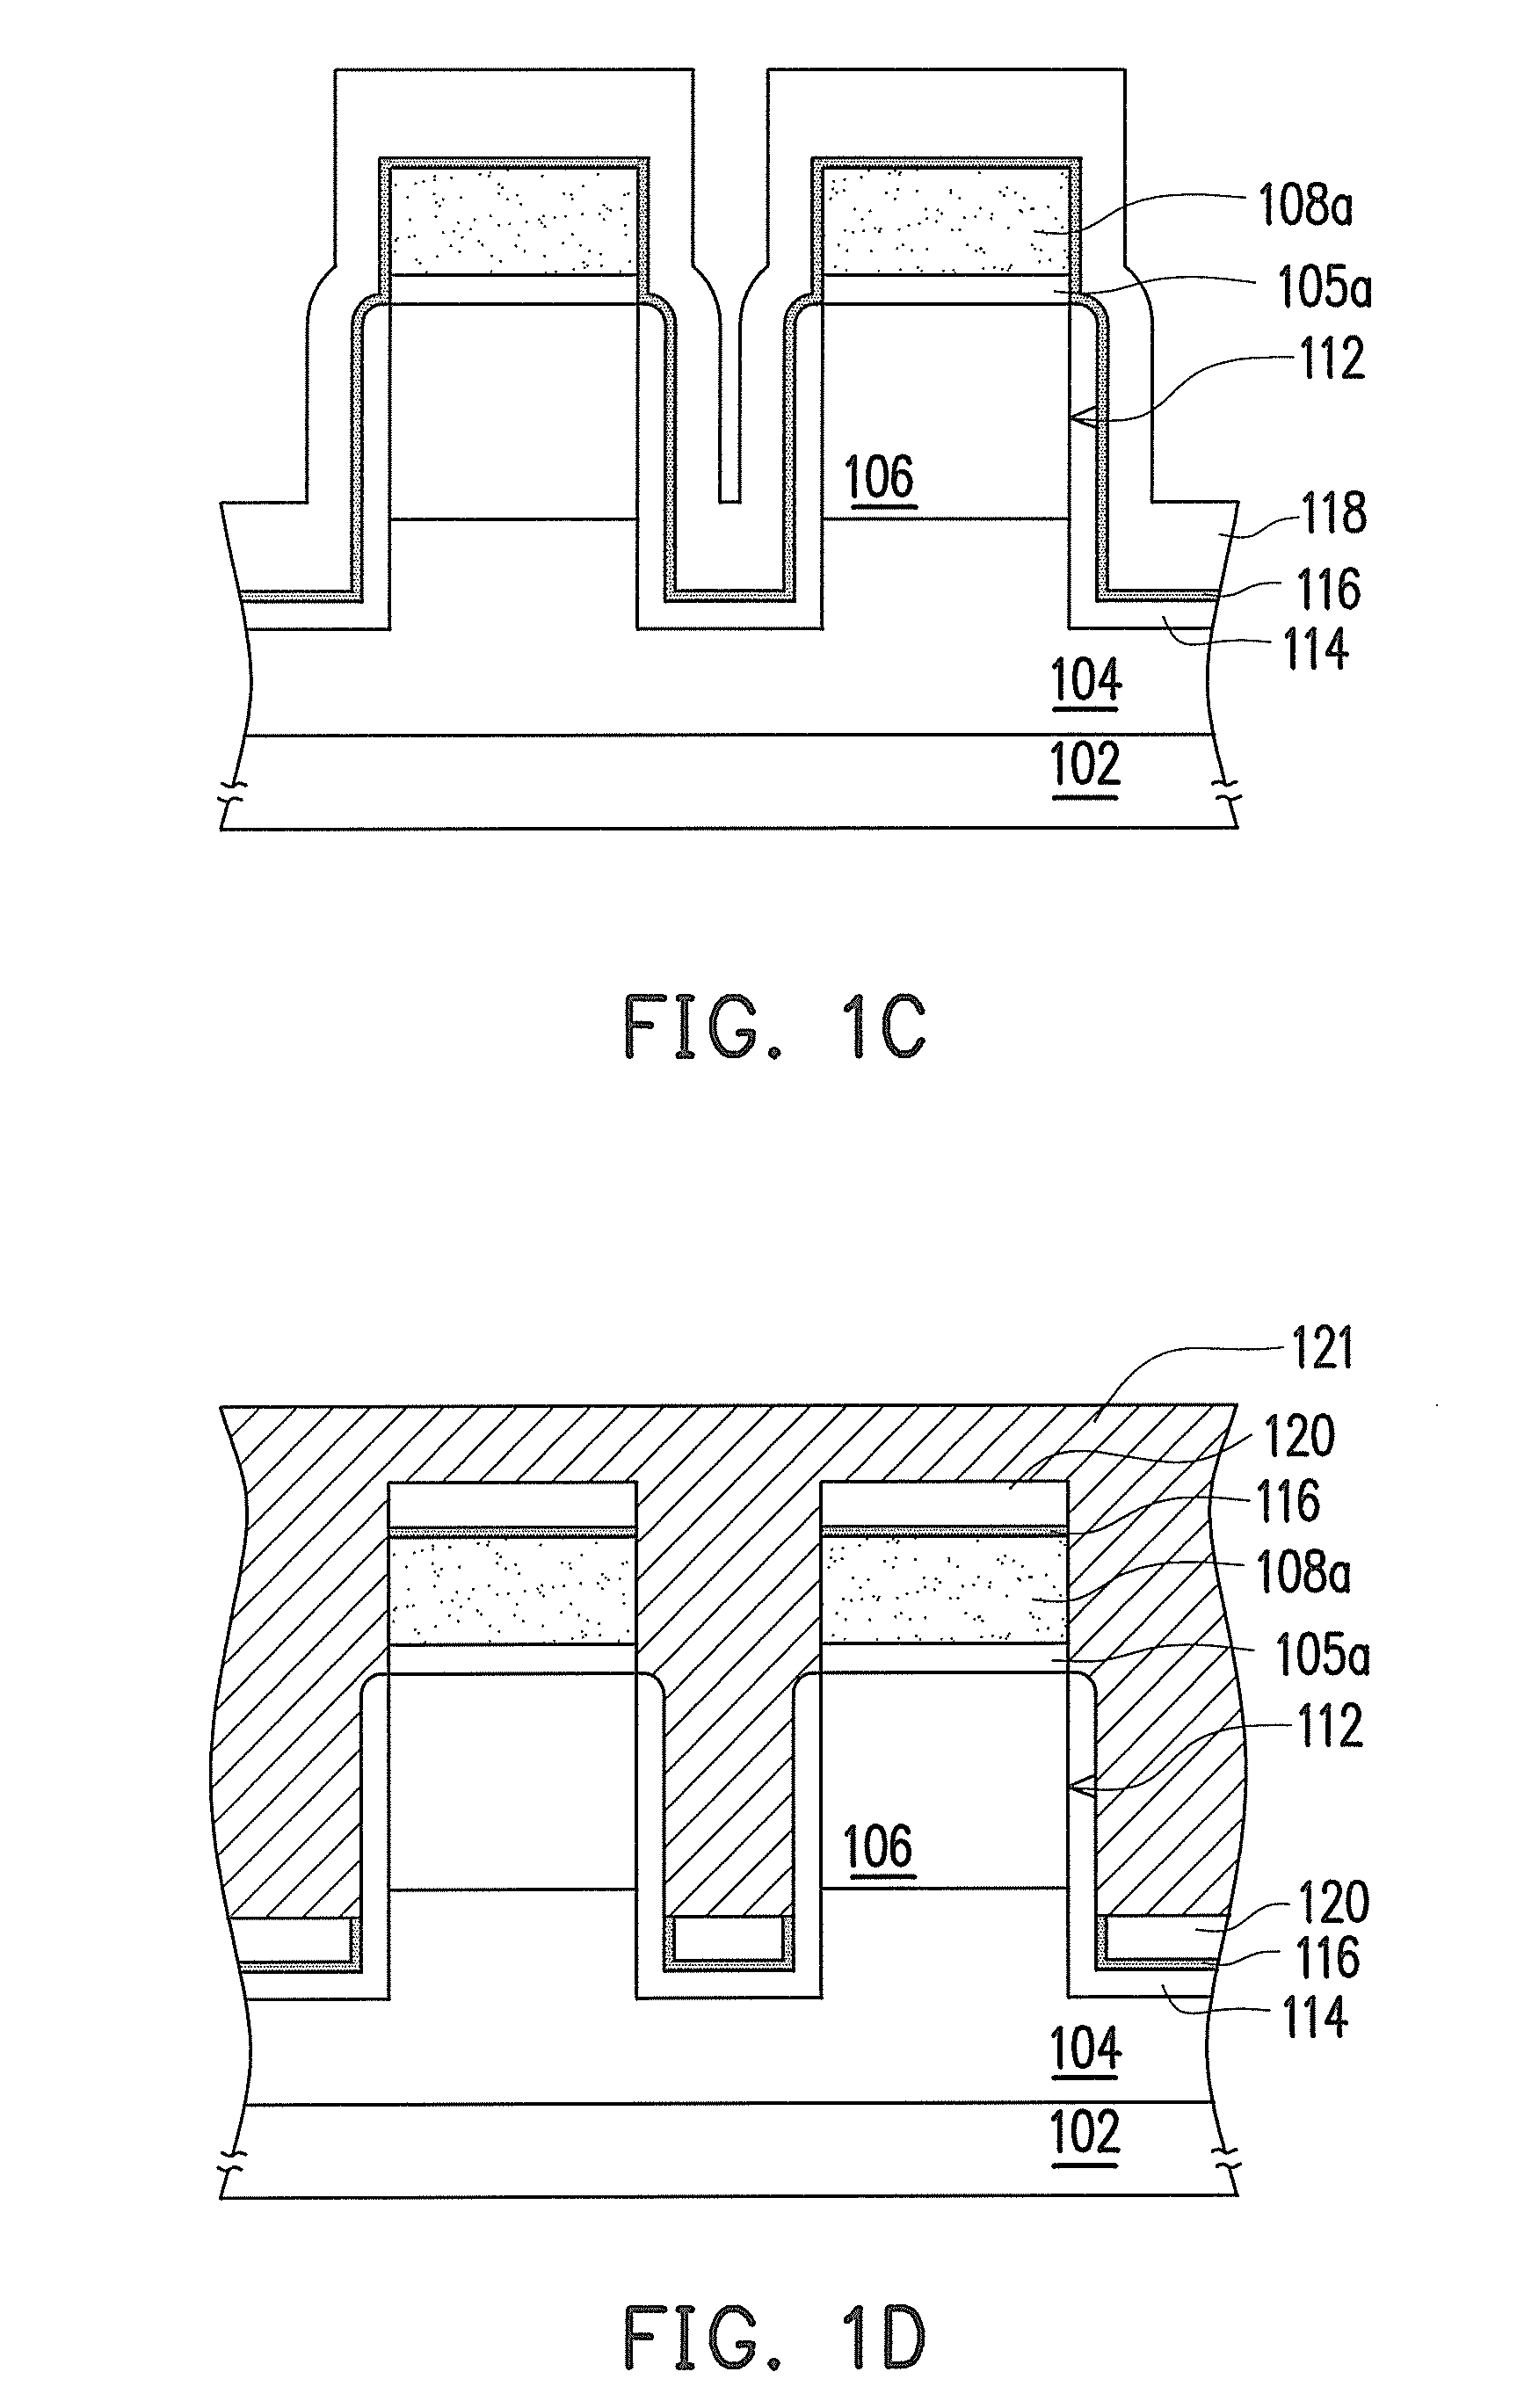 Method of forming power mosfet